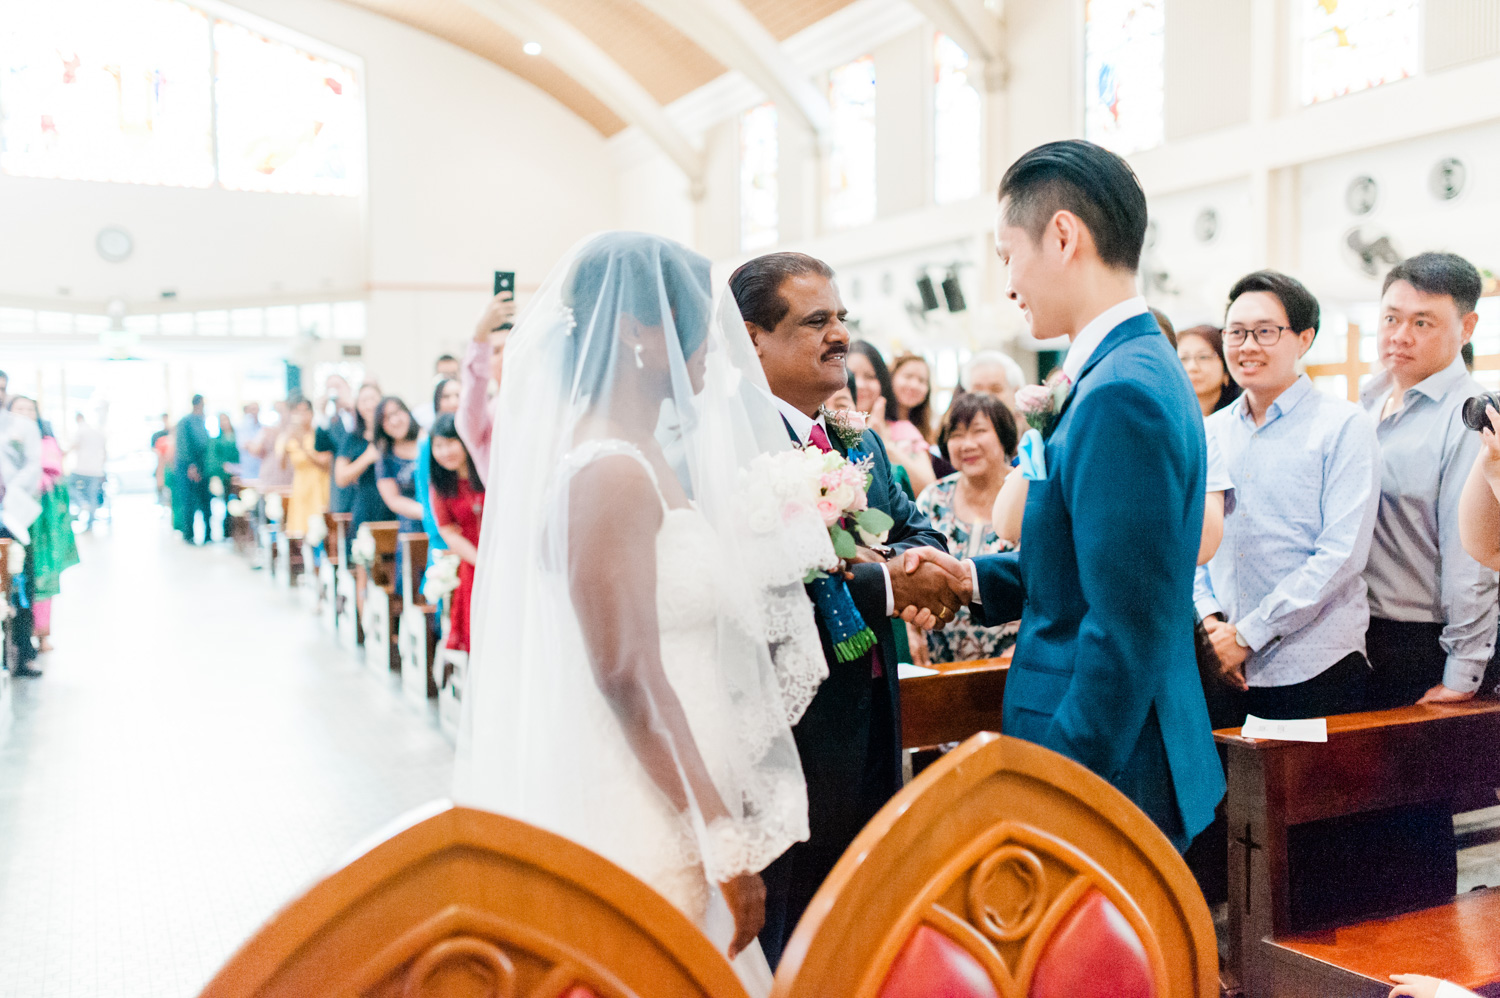 sfx-church-st-francis-xavier-kuala-lumpur-wedding-actual-day-mixed-couple-marriage-candid-blue-themed